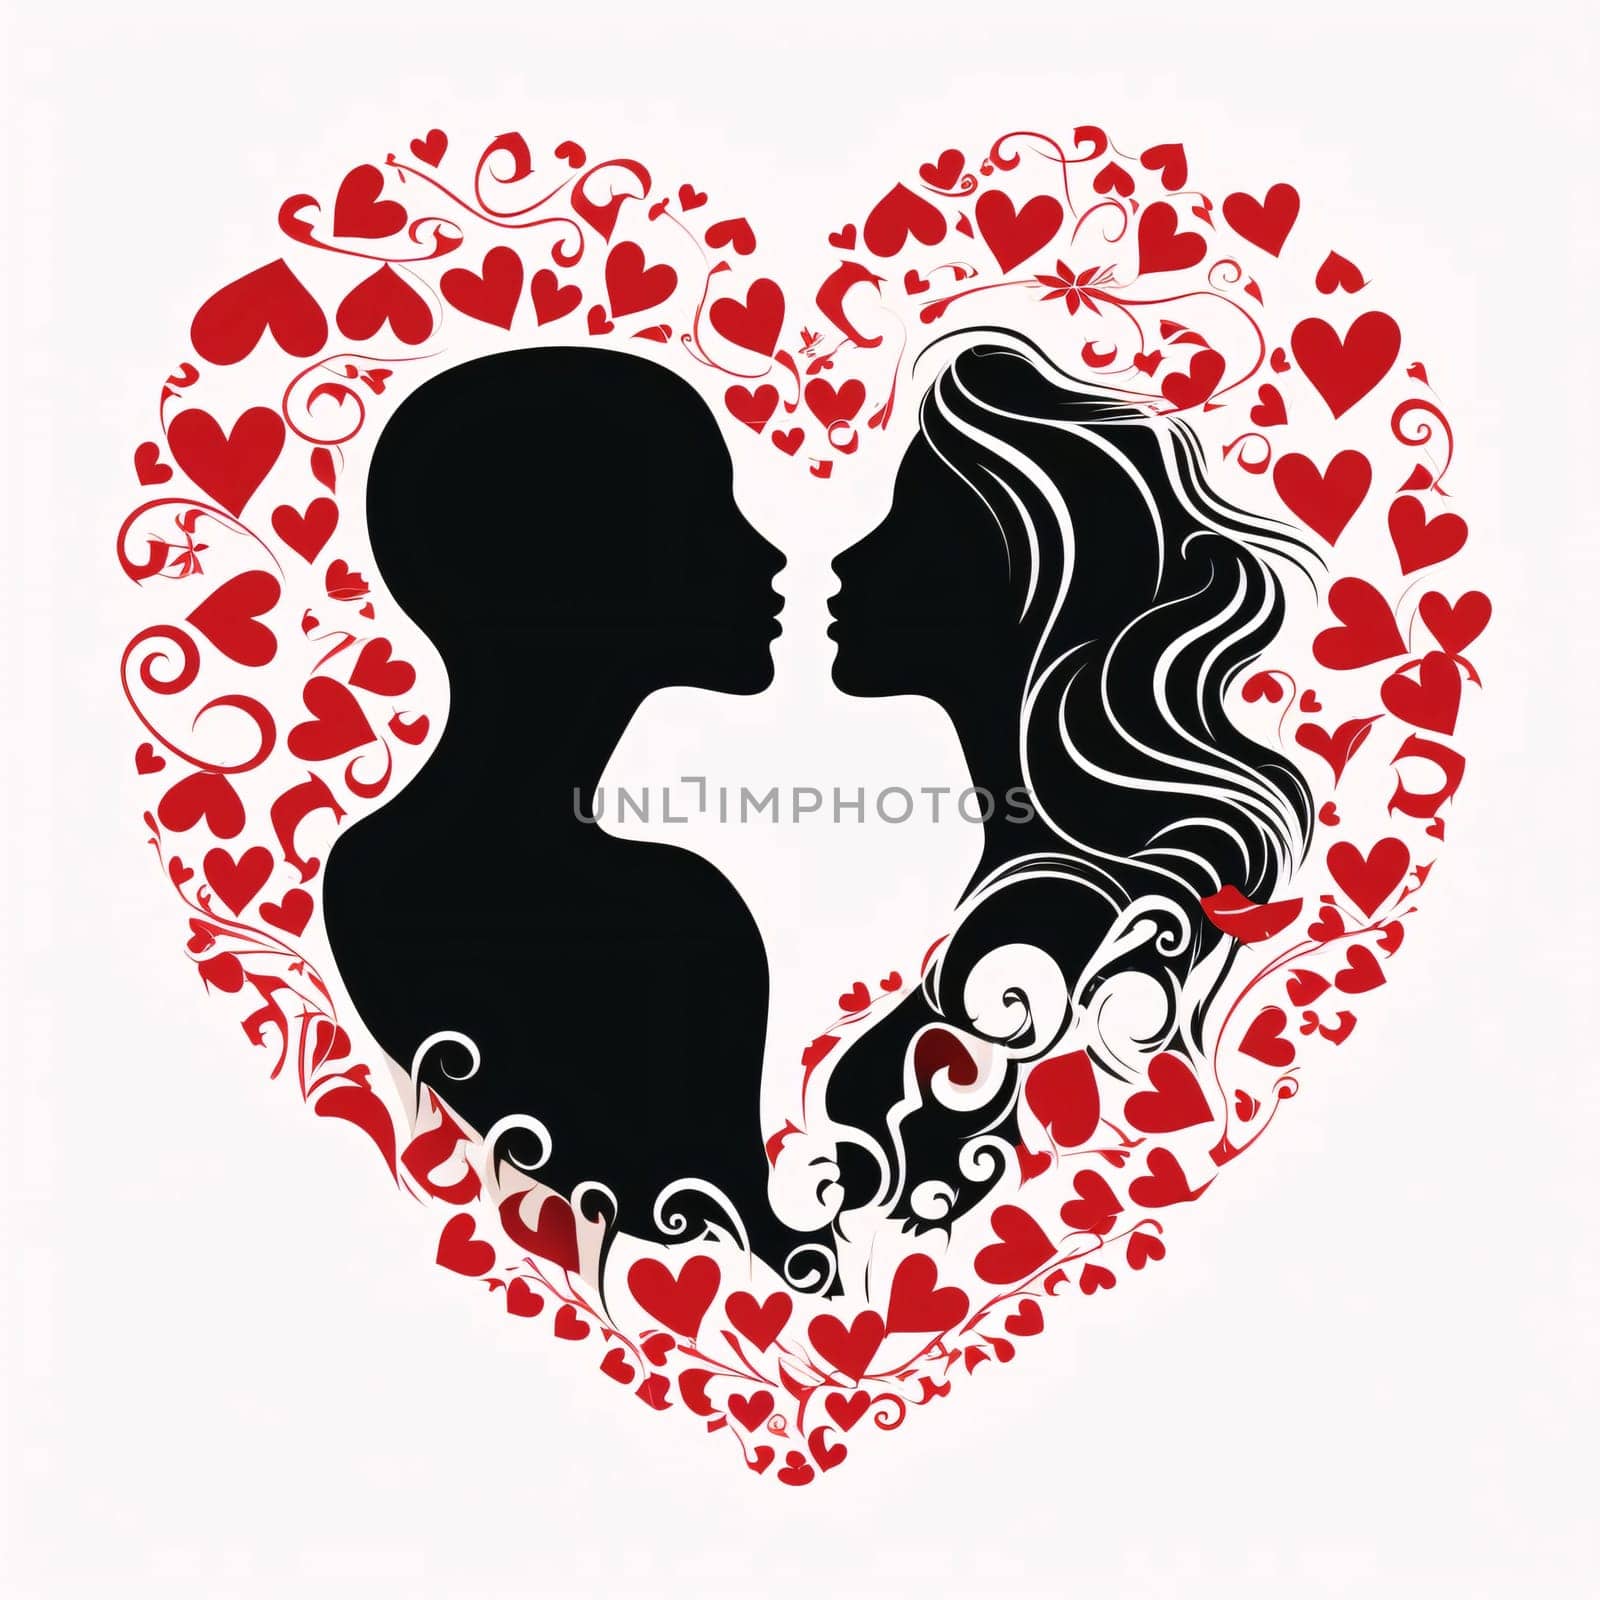 Black silhouette of a kissing couple in the middle of a large decorated red heart, white background isolated. Heart as a symbol of affection and love. The time of falling in love and love.